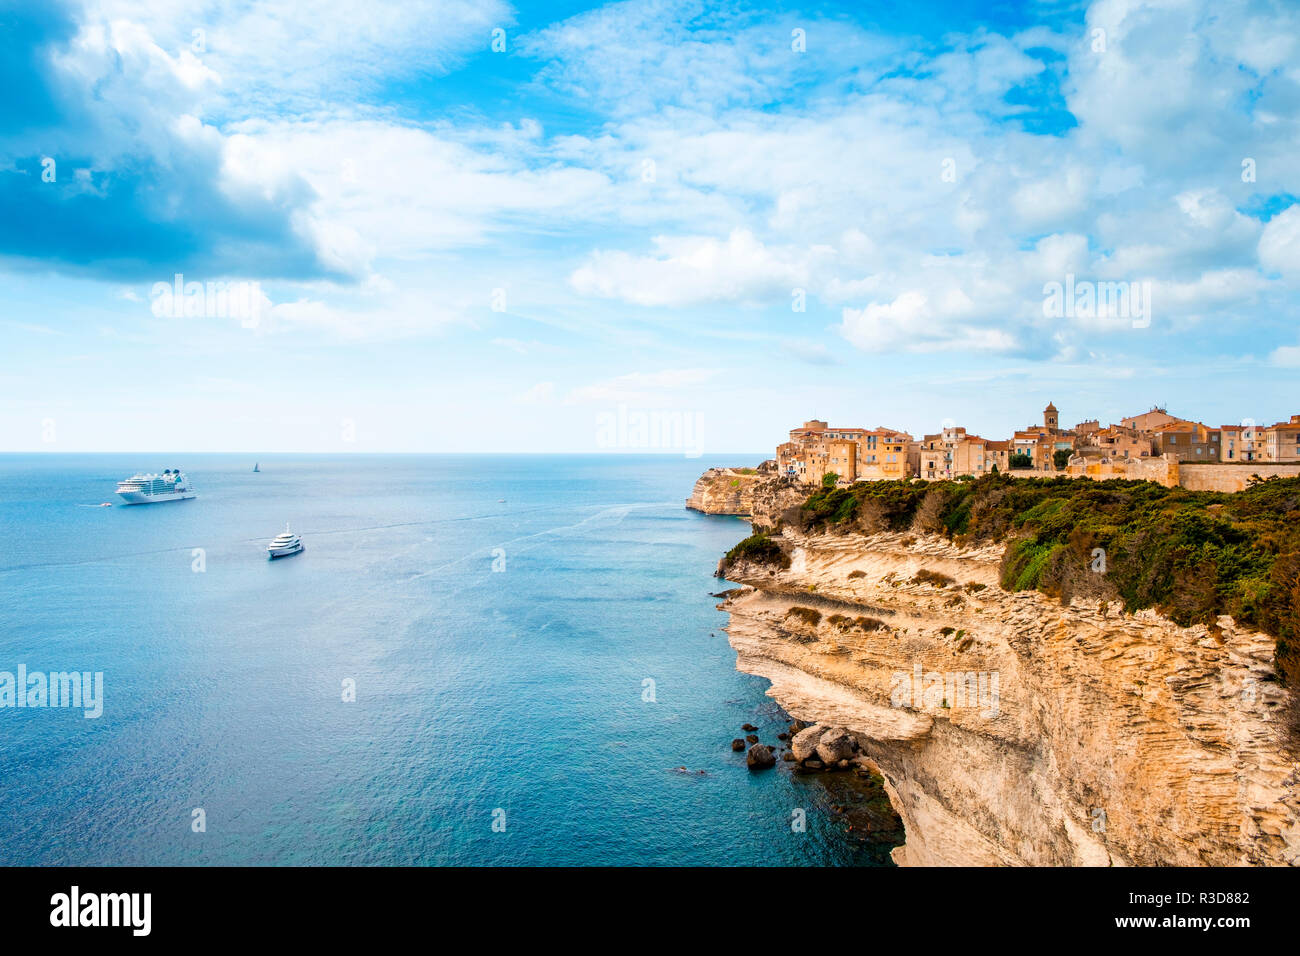 a view of the picturesque Ville Haute, the old town of Bonifacio, in Corse, France, on the top of a cliff over the Mediterranean sea Stock Photo